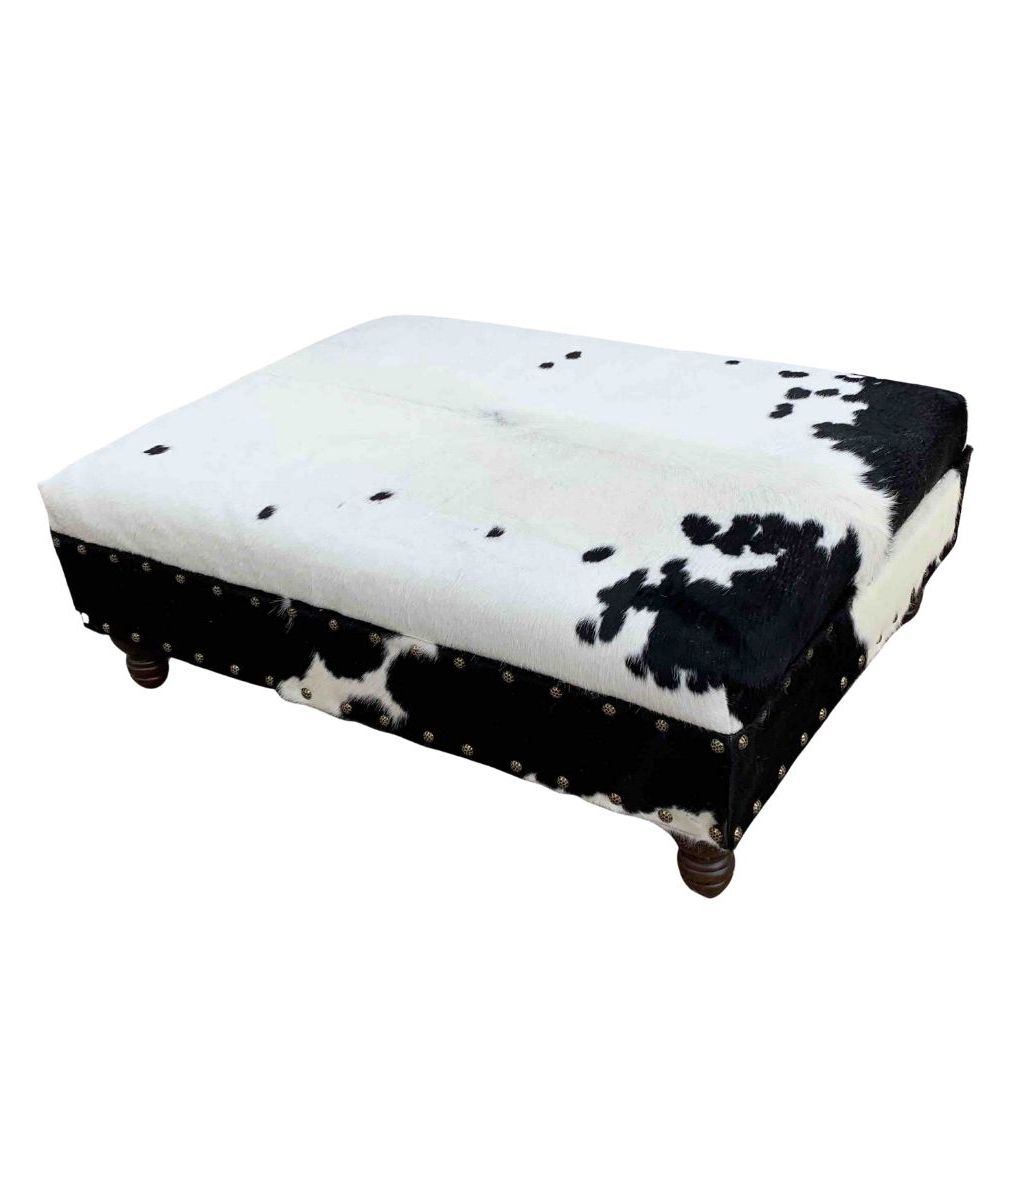 2020 Black And White Cowhide Ottoman Table – Rustic Artistry Pertaining To White Cow Hide Ottomans (View 6 of 15)